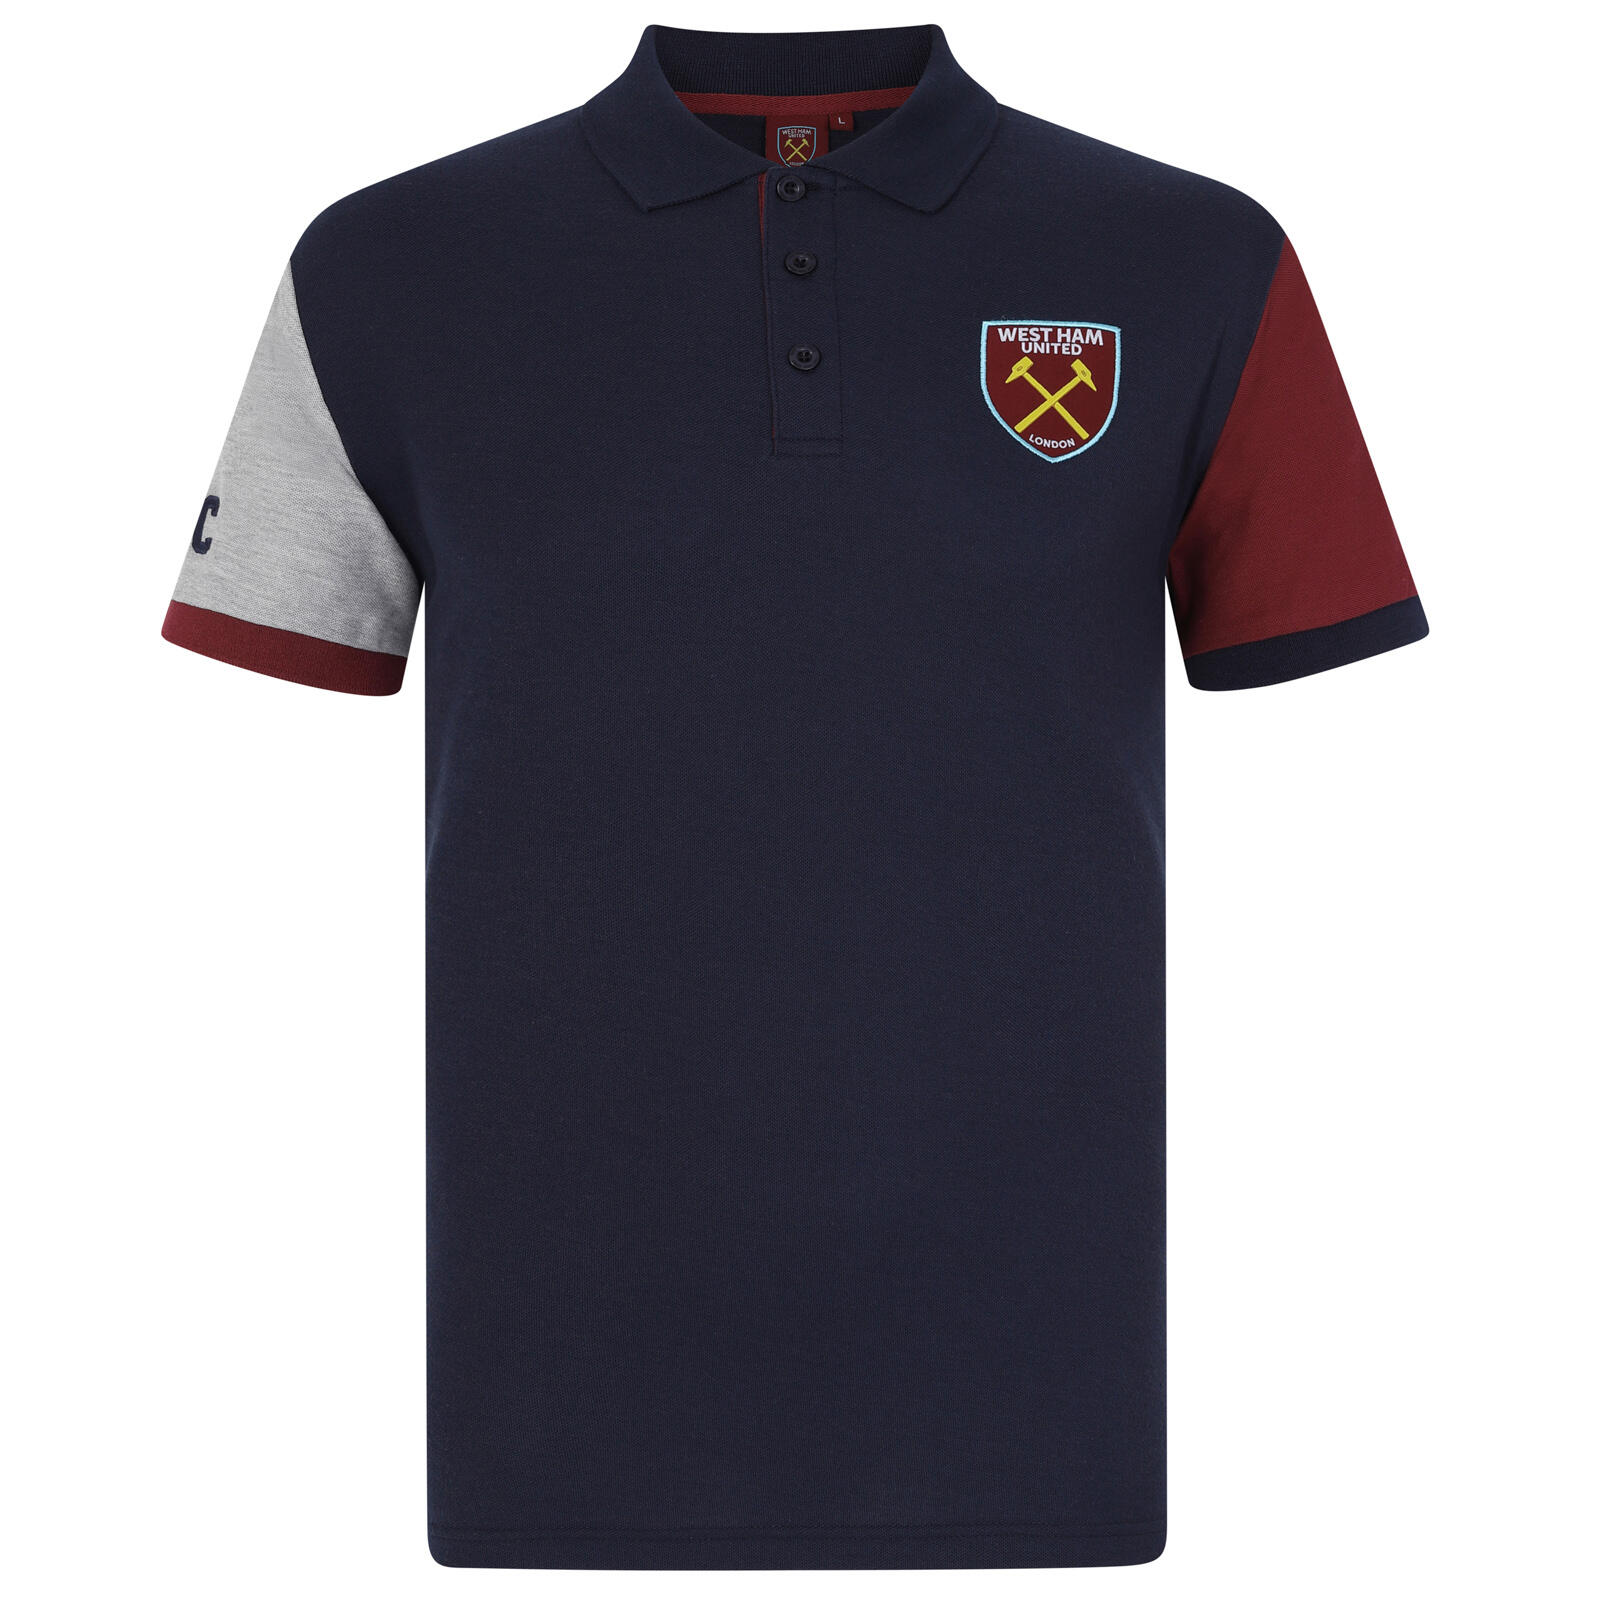 WEST HAM UNITED West Ham United Mens Polo Shirt Crest OFFICIAL Football Gift